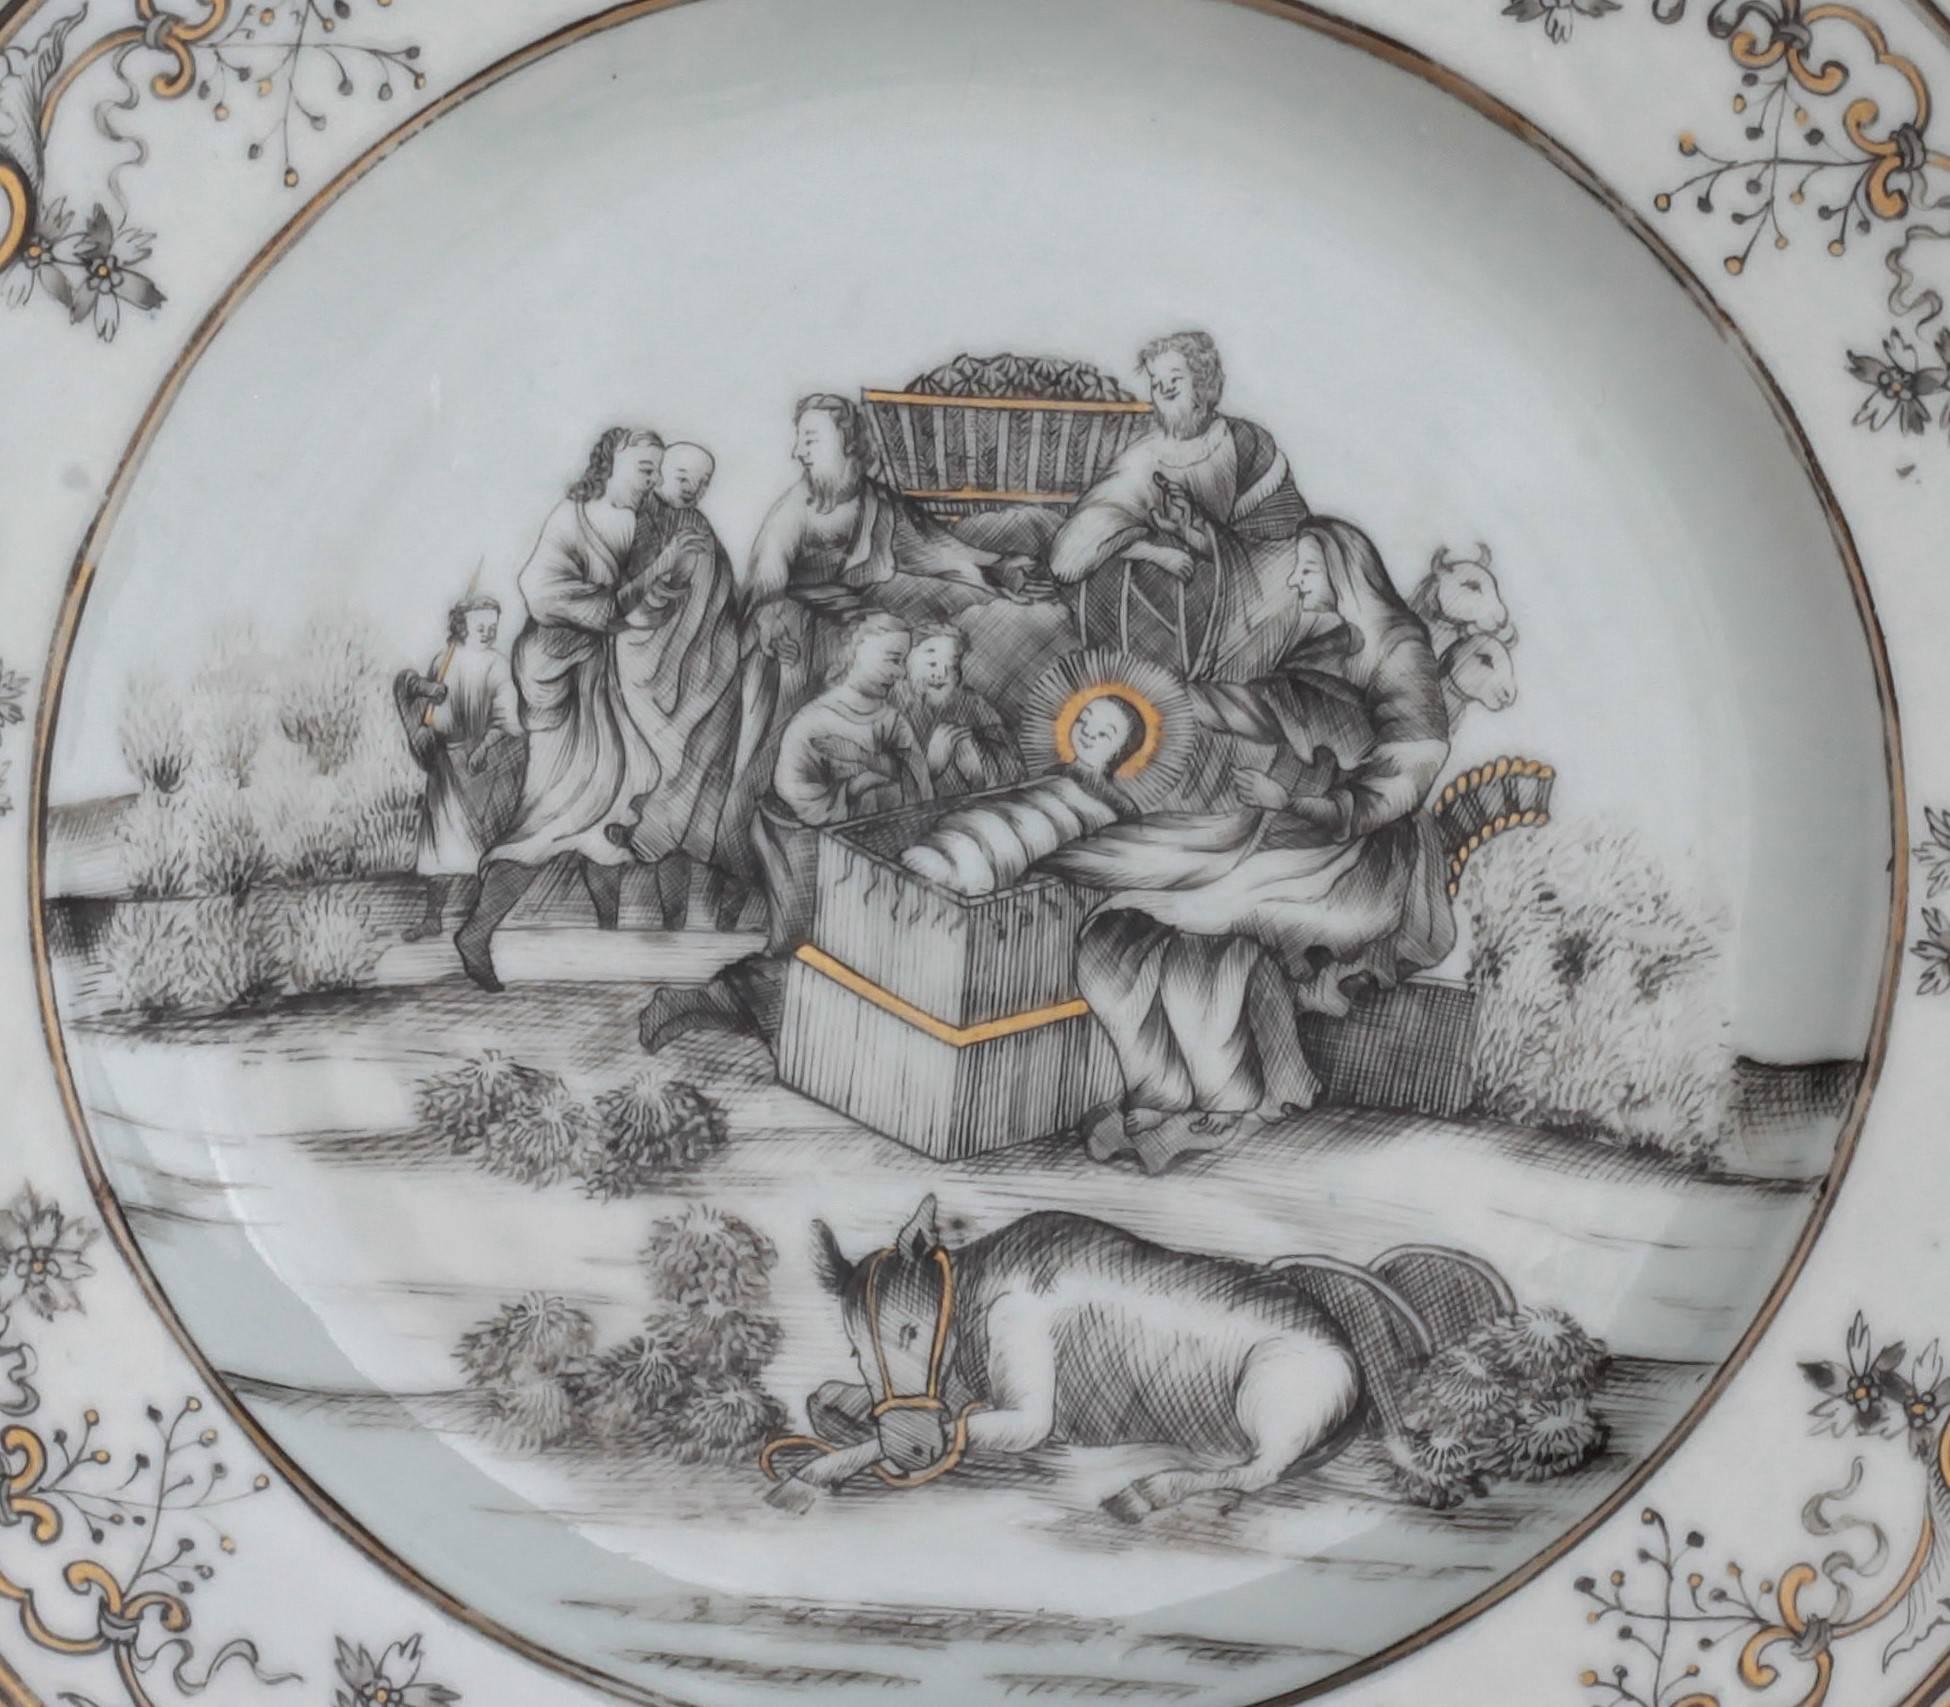 A China porcelain plate with grey and gold decoration representing the Christmas.
Qianlong period (1736-1795), 18th century.
Measures: Diameter 22.8 cm.
Chip and hairline crack restored at 6:30.